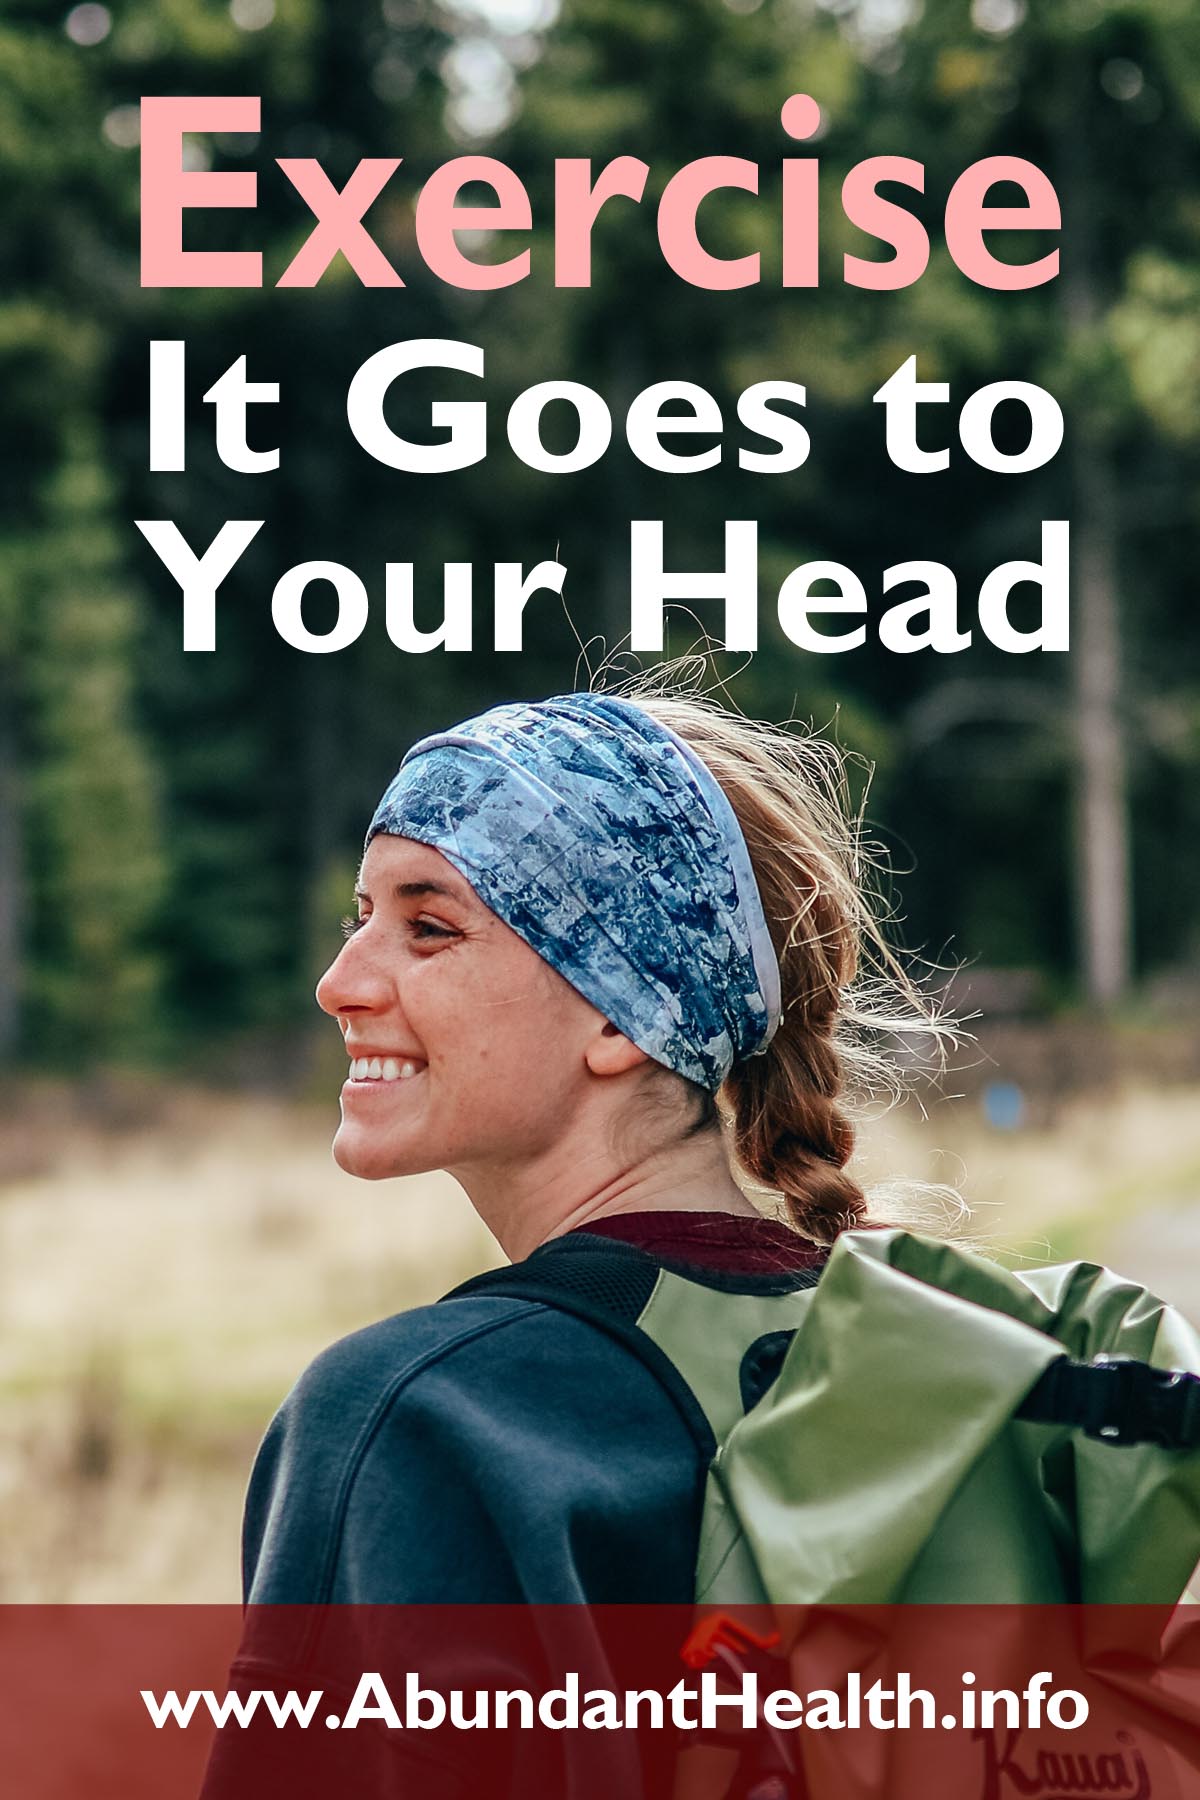 Exercise: It Goes to Your Head